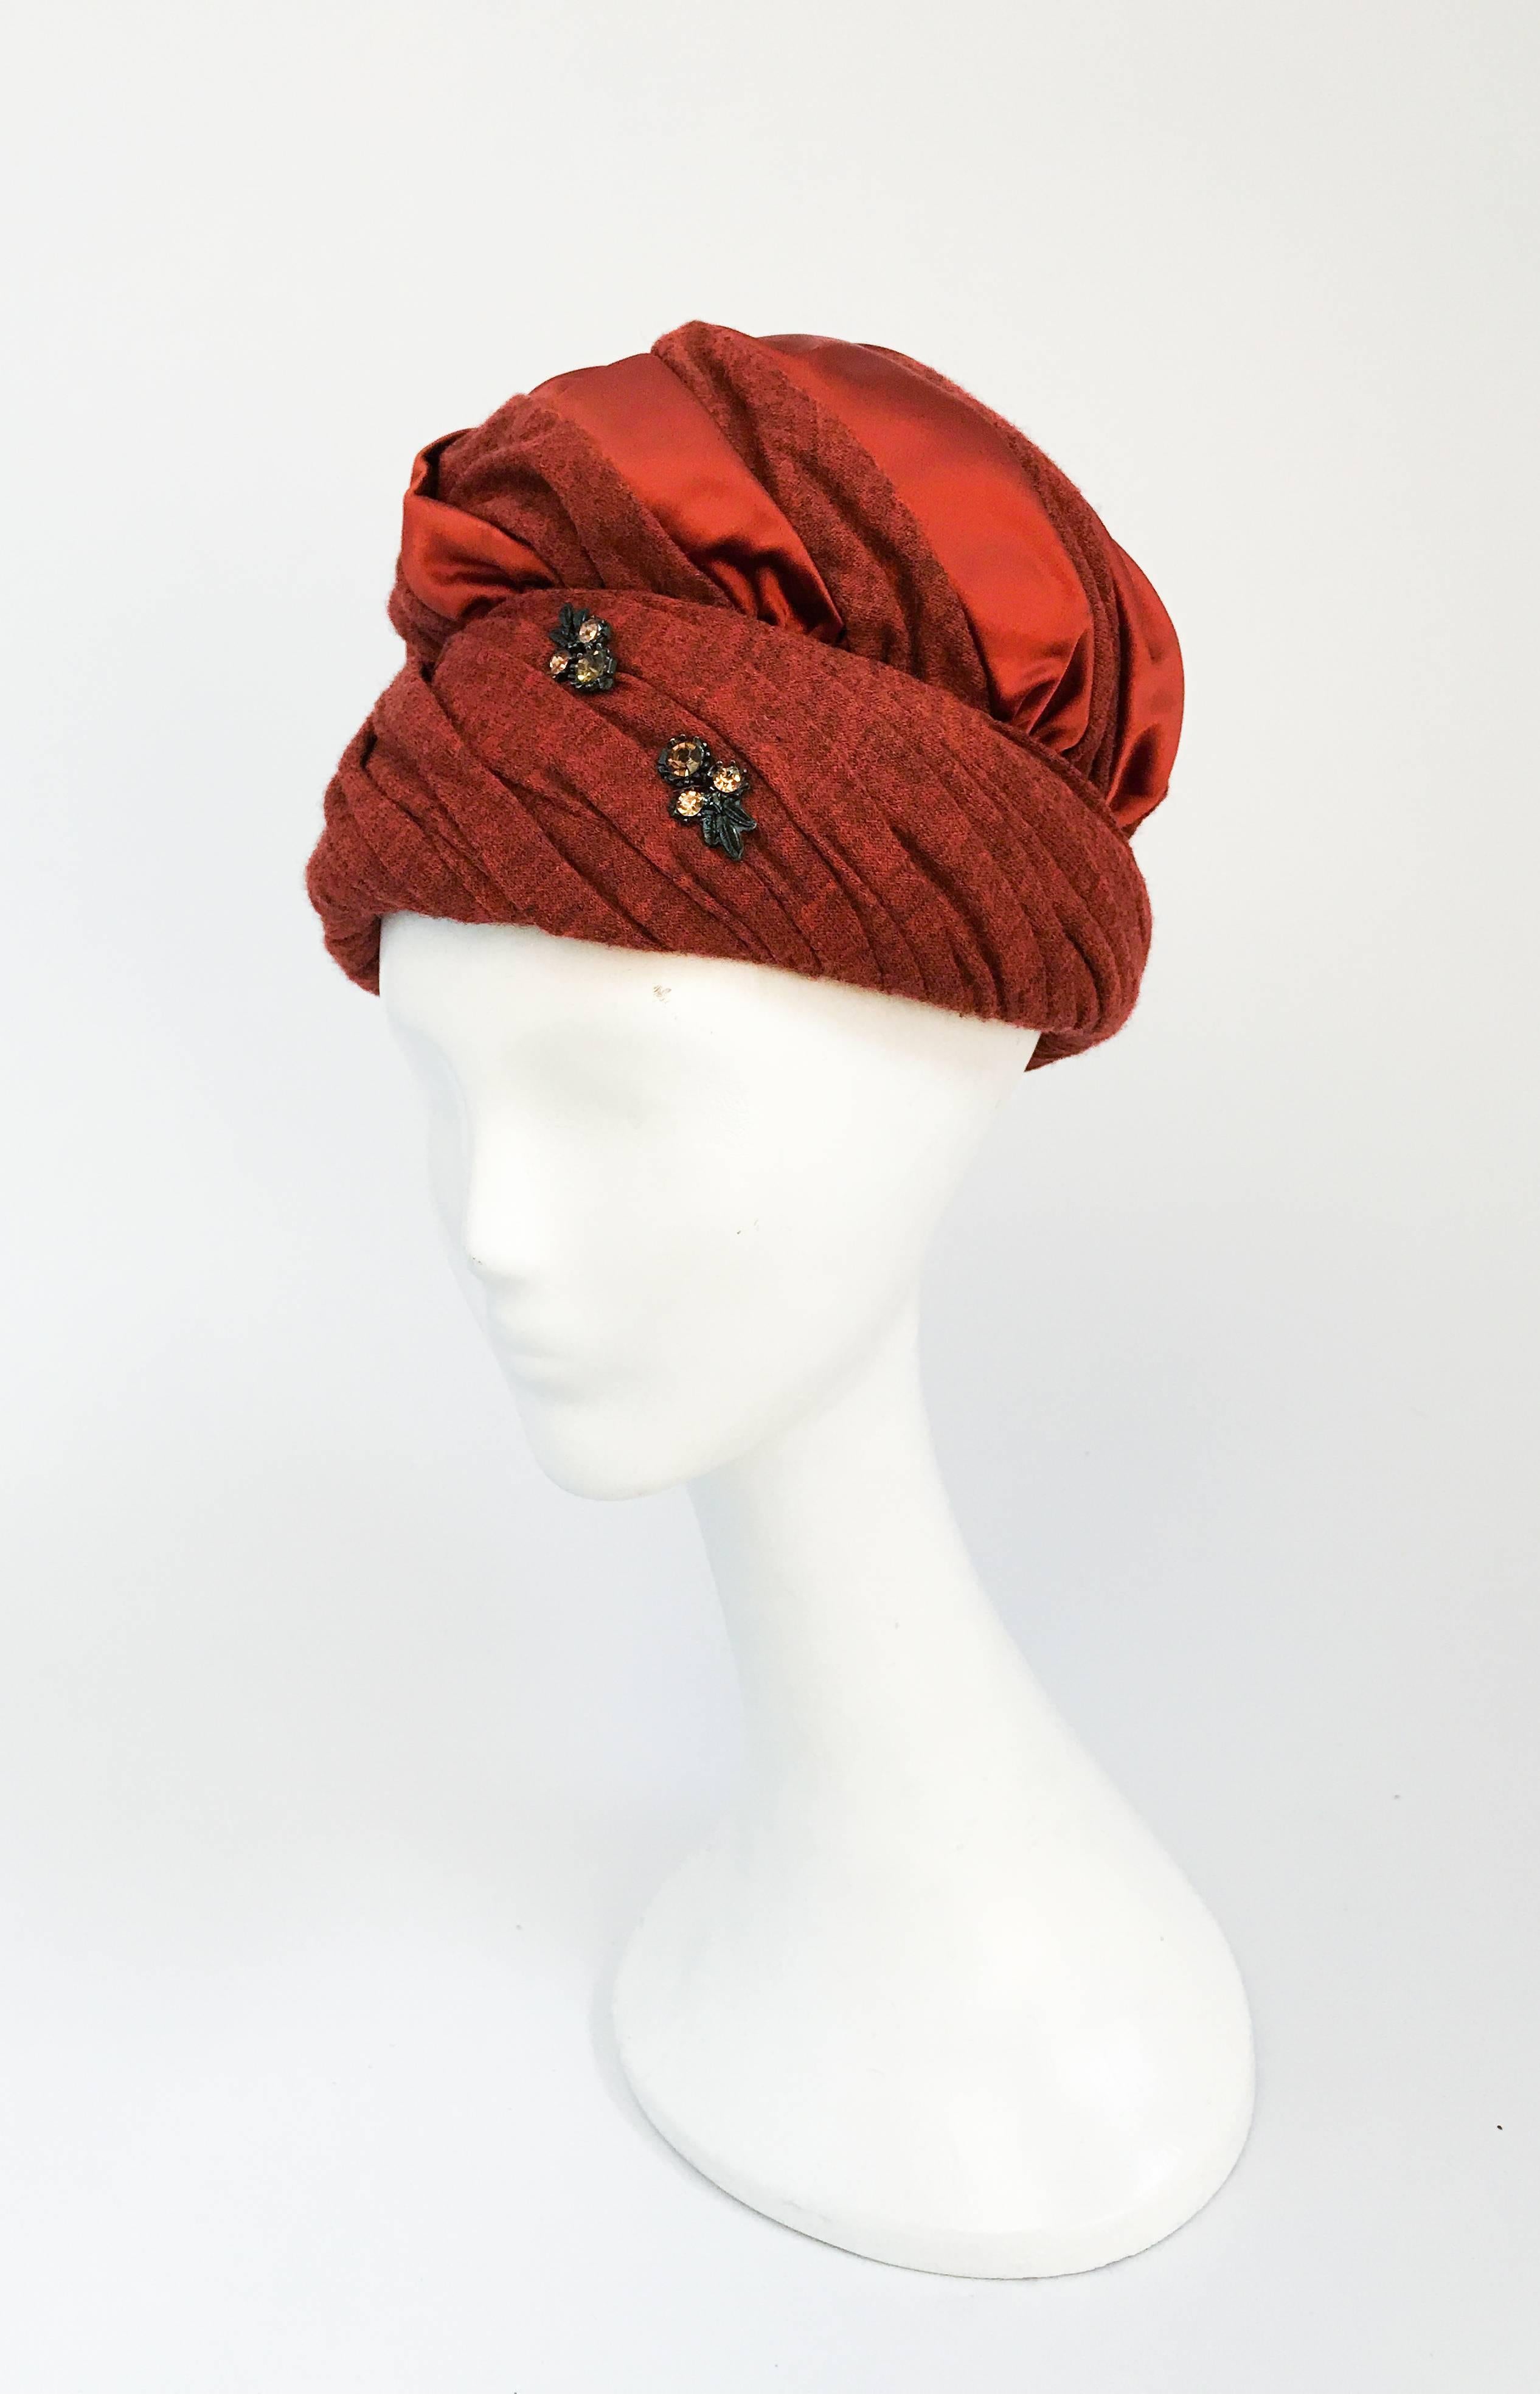 1960s Rust Jersey and Satin Turban with Rhinestone Embellishment. Rust jersey and satin turban with rhinestone accent. 22-inch circumference (medium).